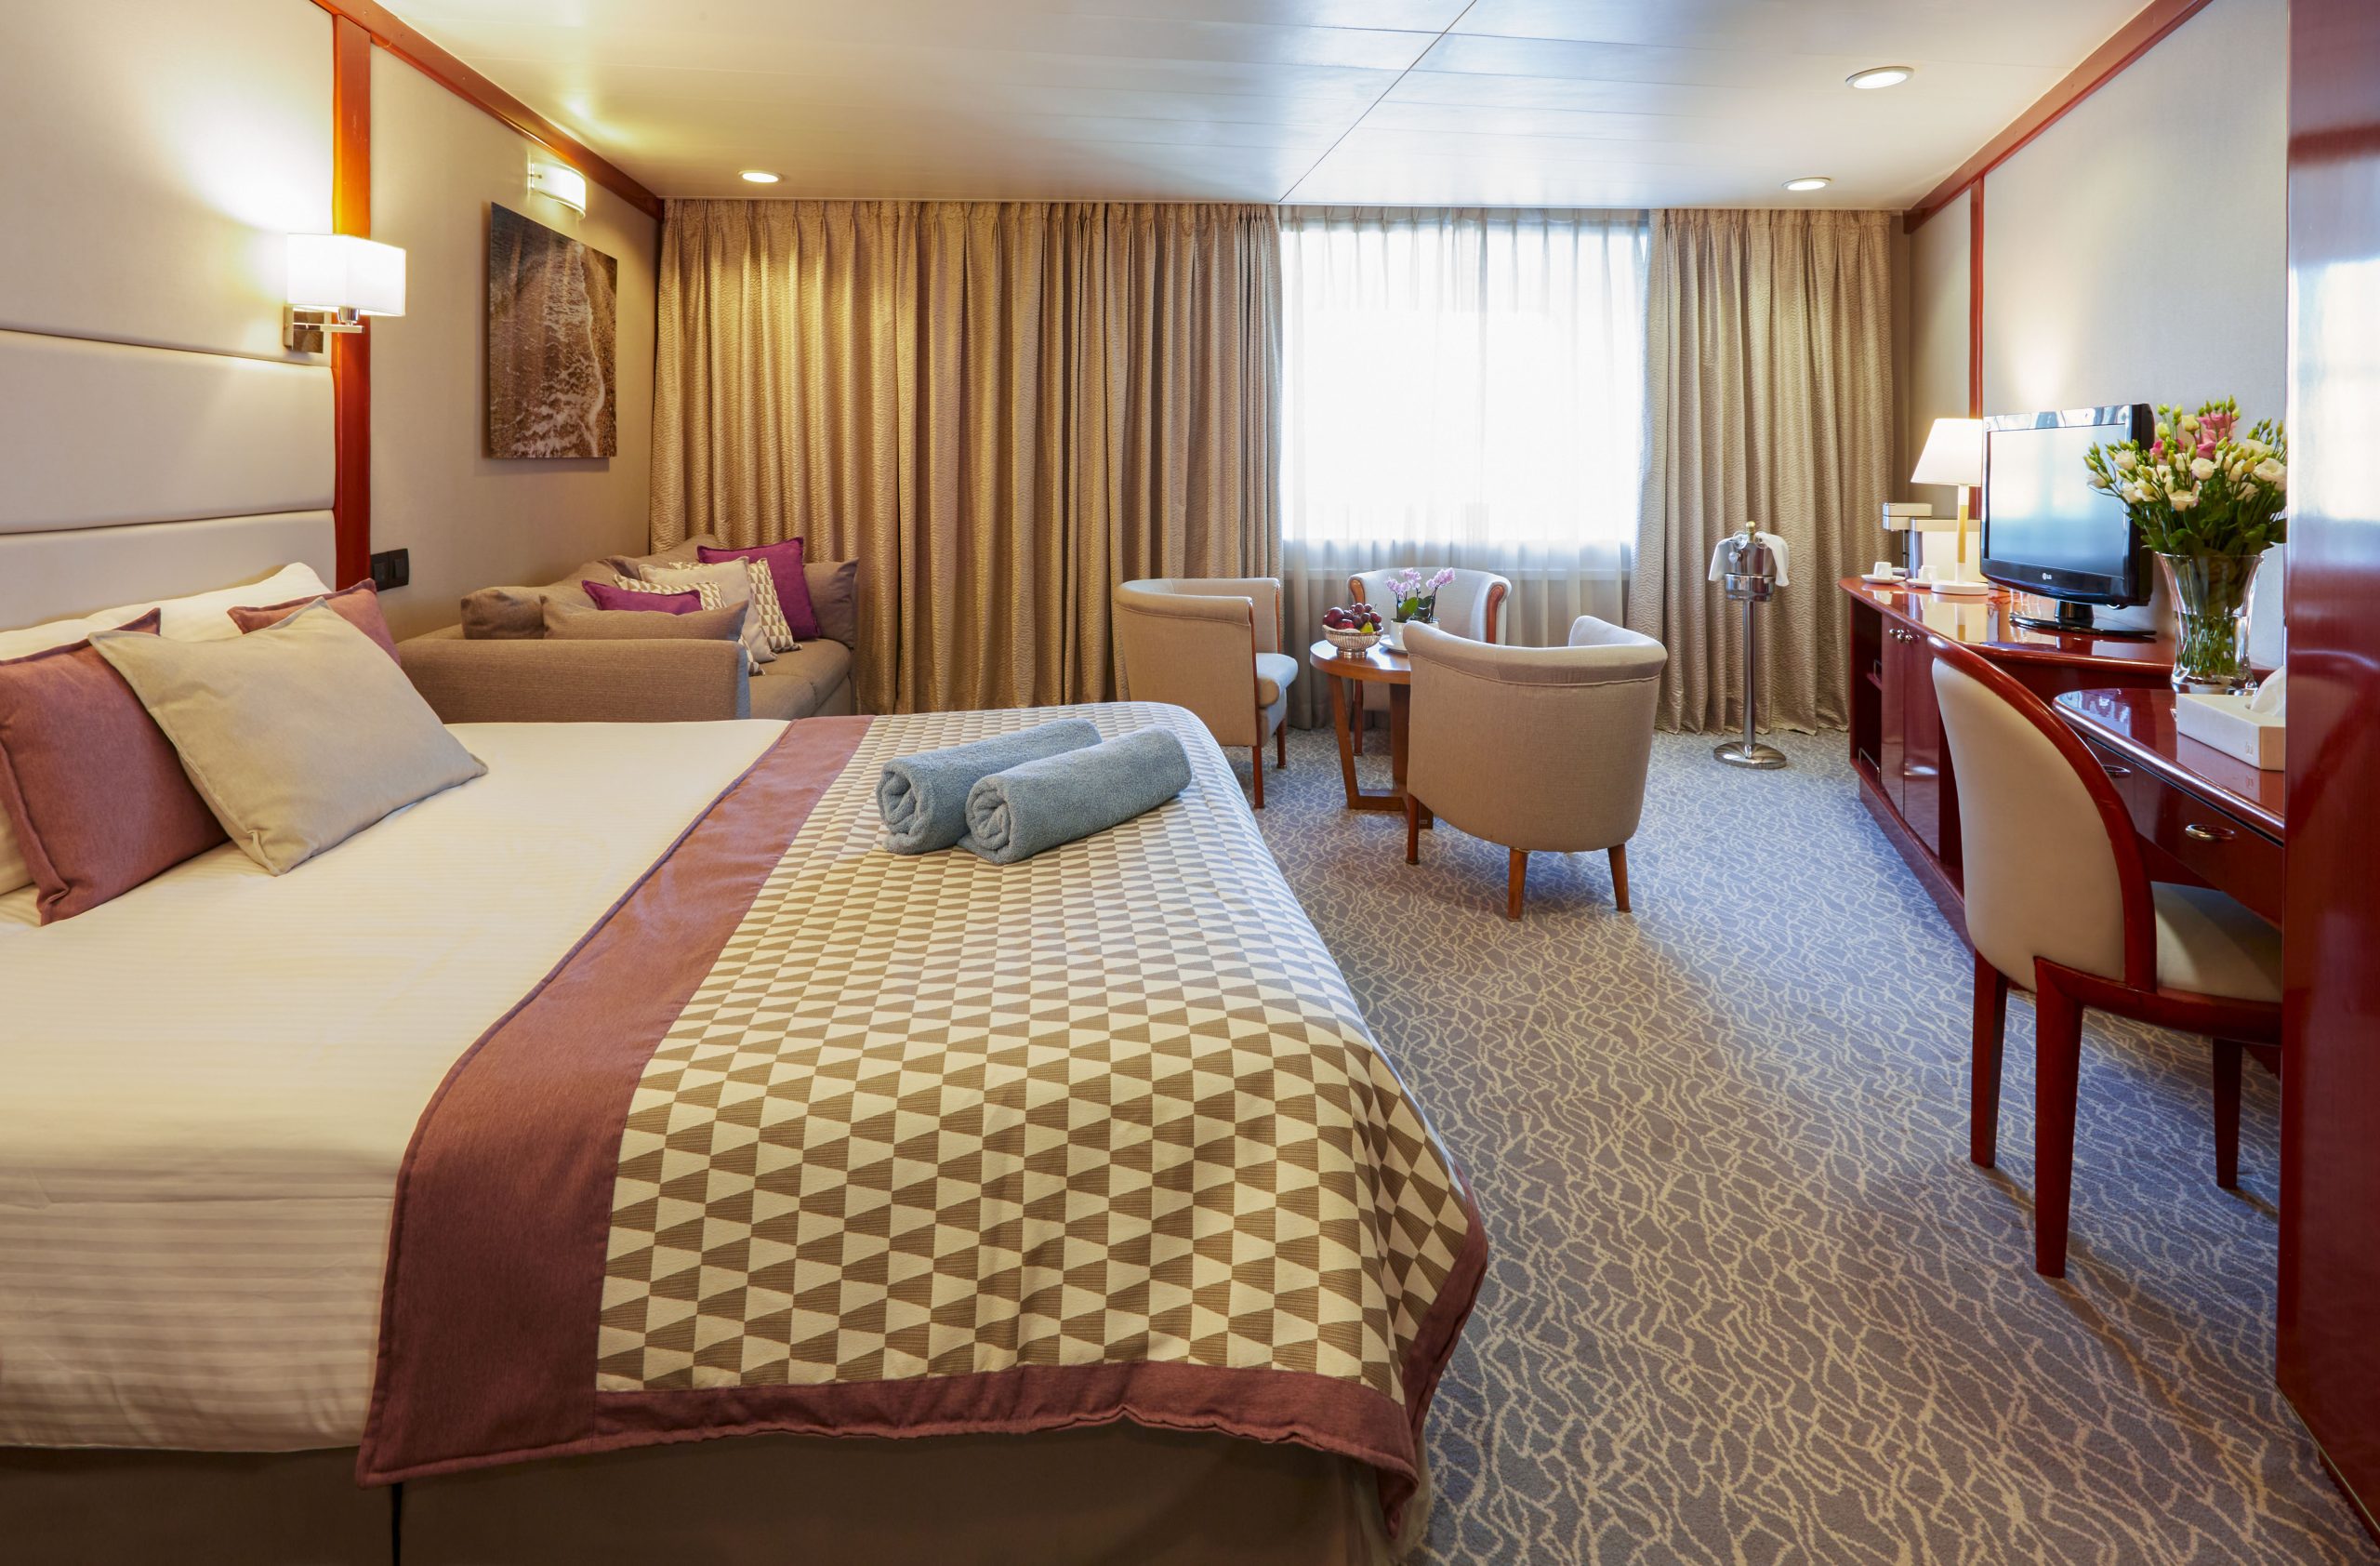 crystal-stateroom-s (1)